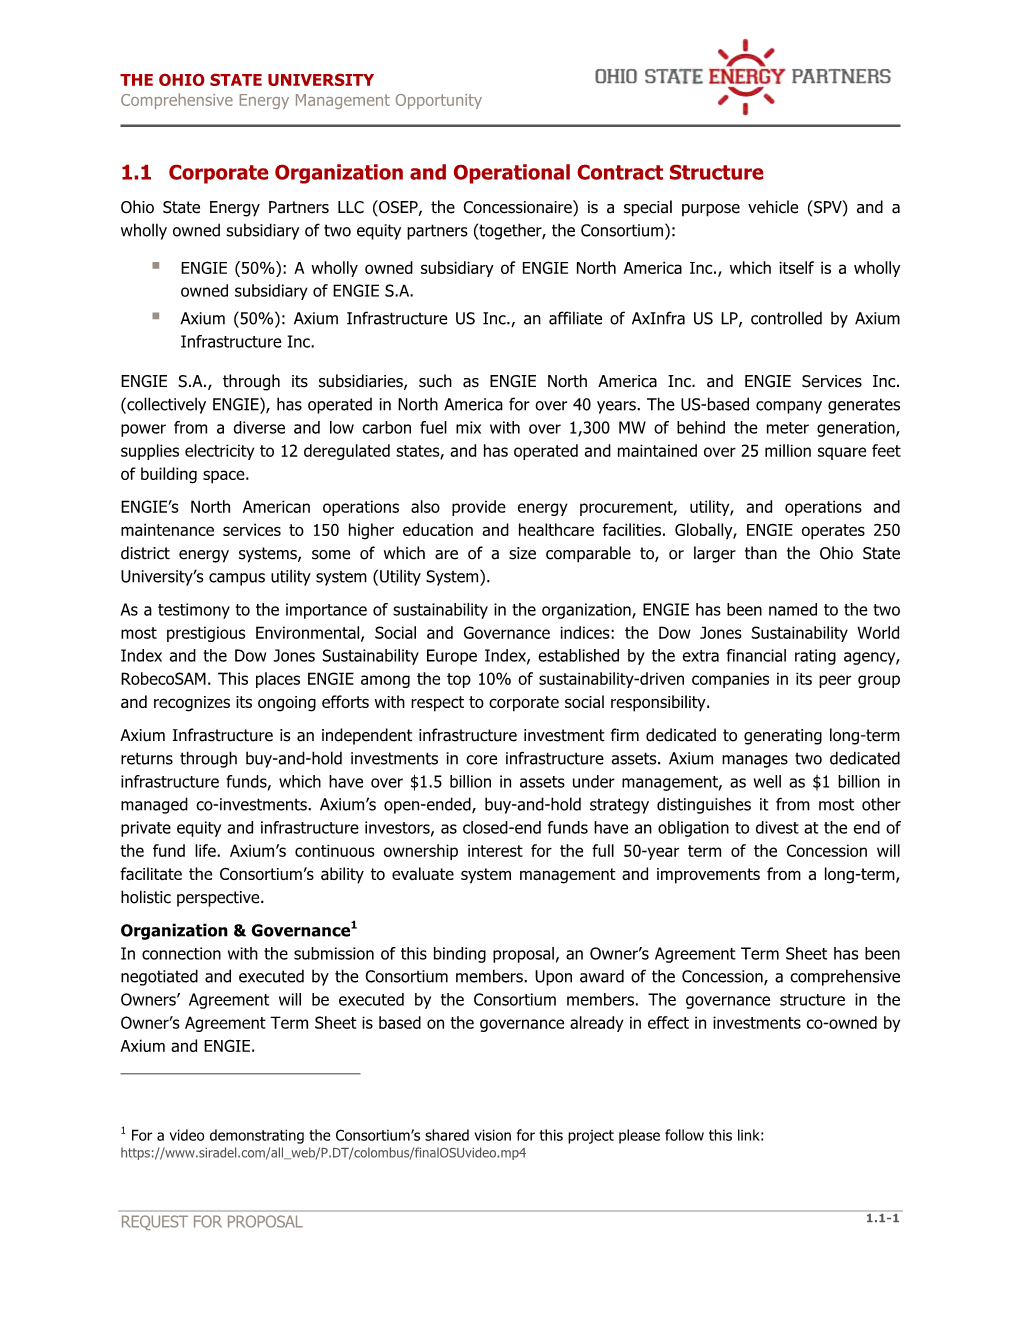 1.1 Corporate Organization and Operational Contract Structure